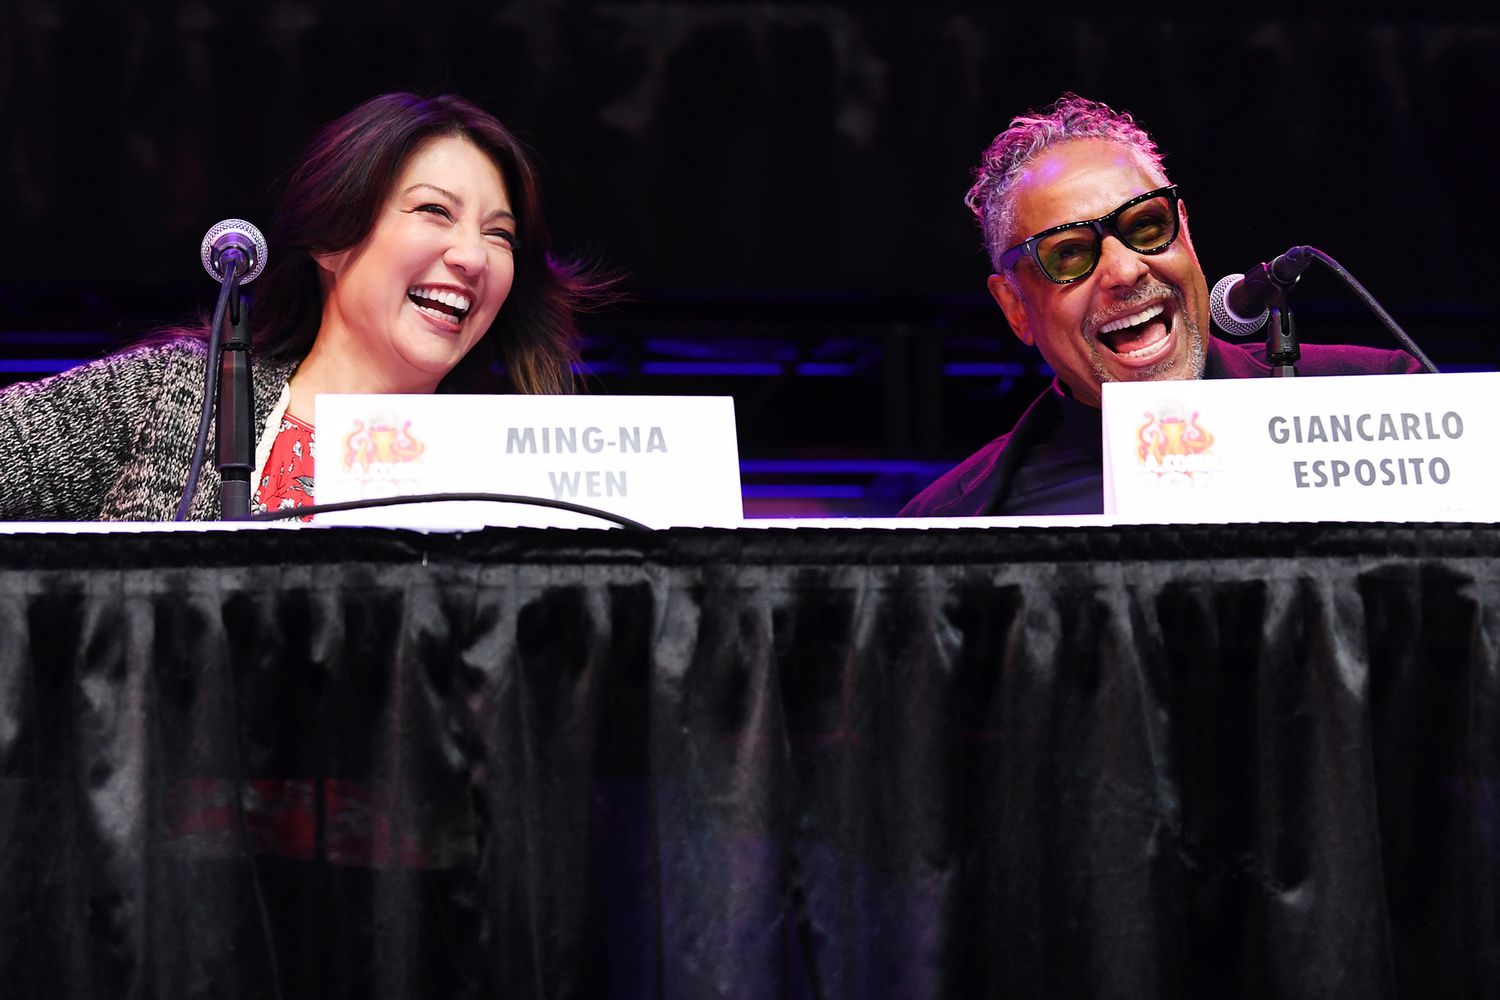 LOS ANGELES, CALIFORNIA - DECEMBER 05: Actors Ming-Na Wen (L) and Giancarlo Esposito speak onstage during 2021 Los Angeles Comic Con at Los Angeles Convention Center on December 05, 2021 in Los Angeles, California. (Photo by Chelsea Guglielmino/Getty Images)